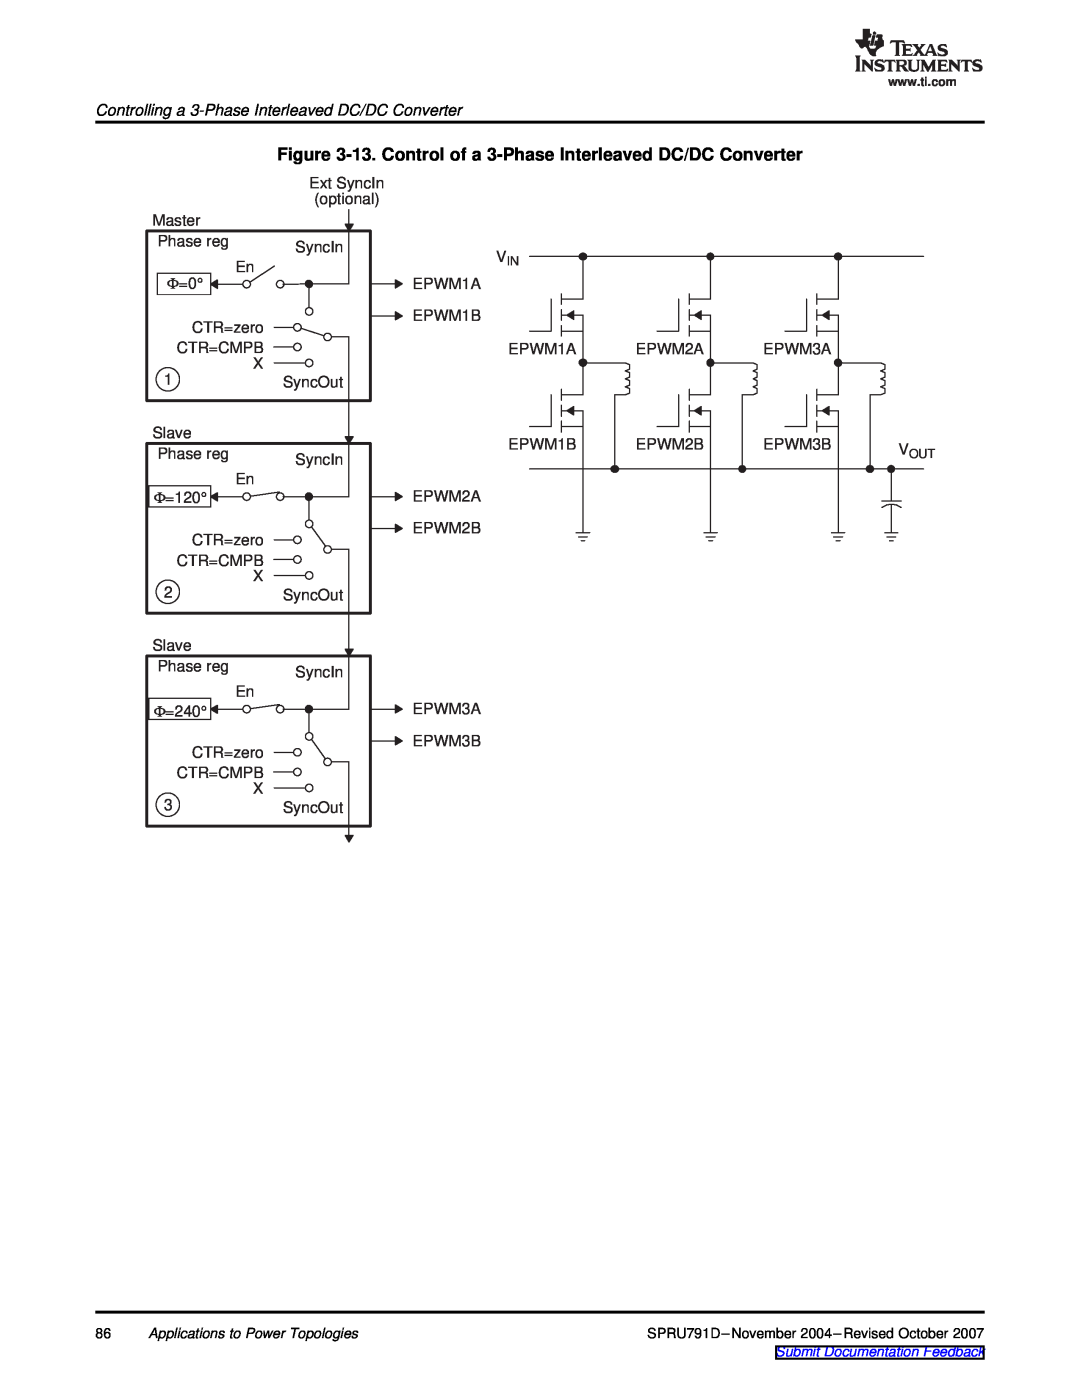 Texas Instruments TMS320x28xx, 28xxx manual 13. Control of a 3-Phase Interleaved DC/DC Converter, =240 